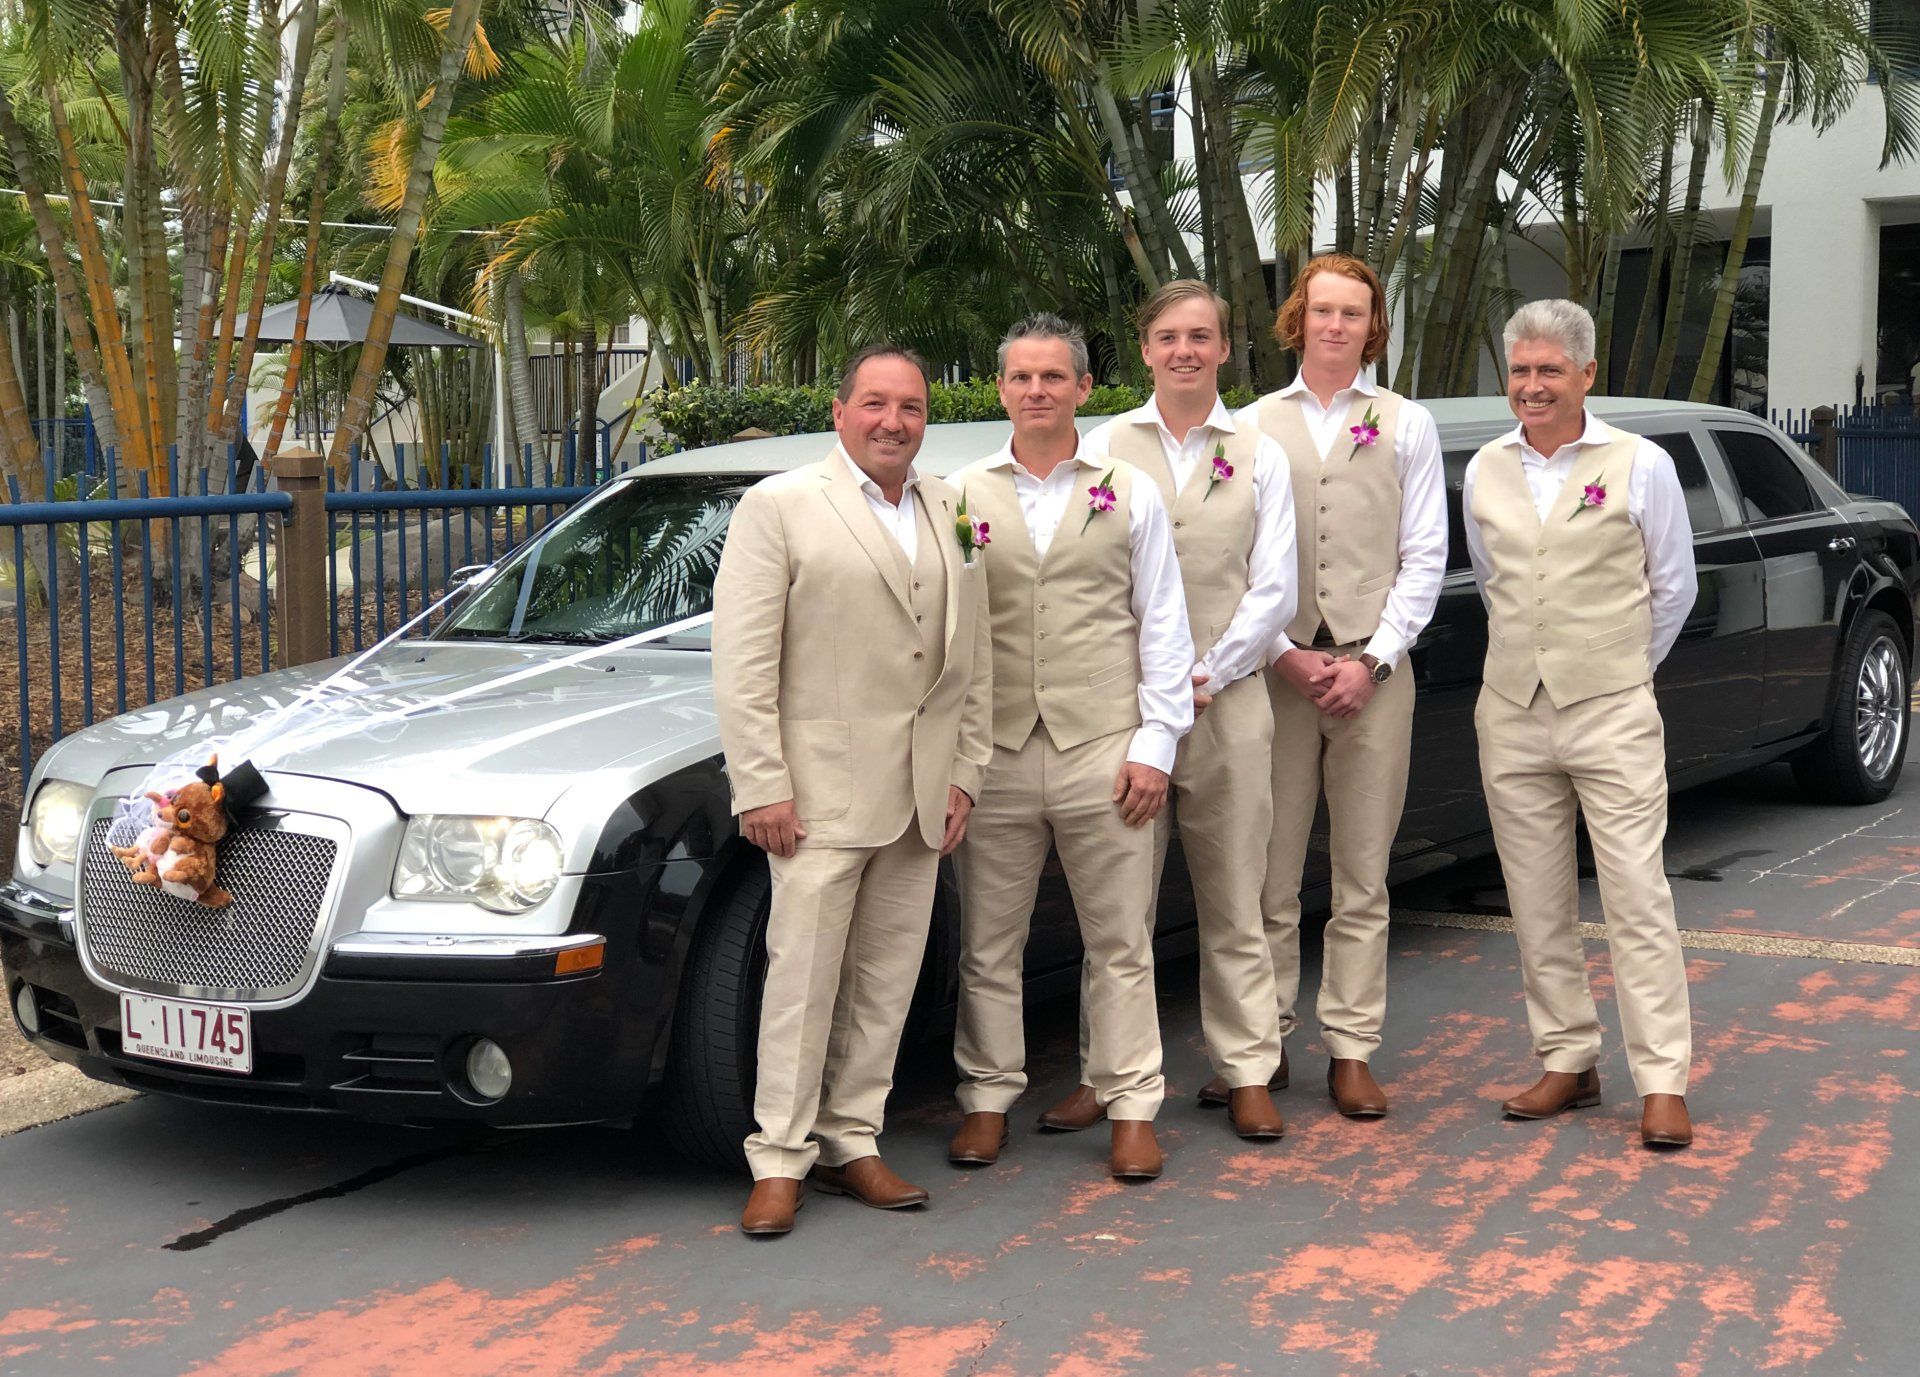 Limousine Behind The Grooms Maid — Superstretch300 Limousines in Golden Beach, QLD